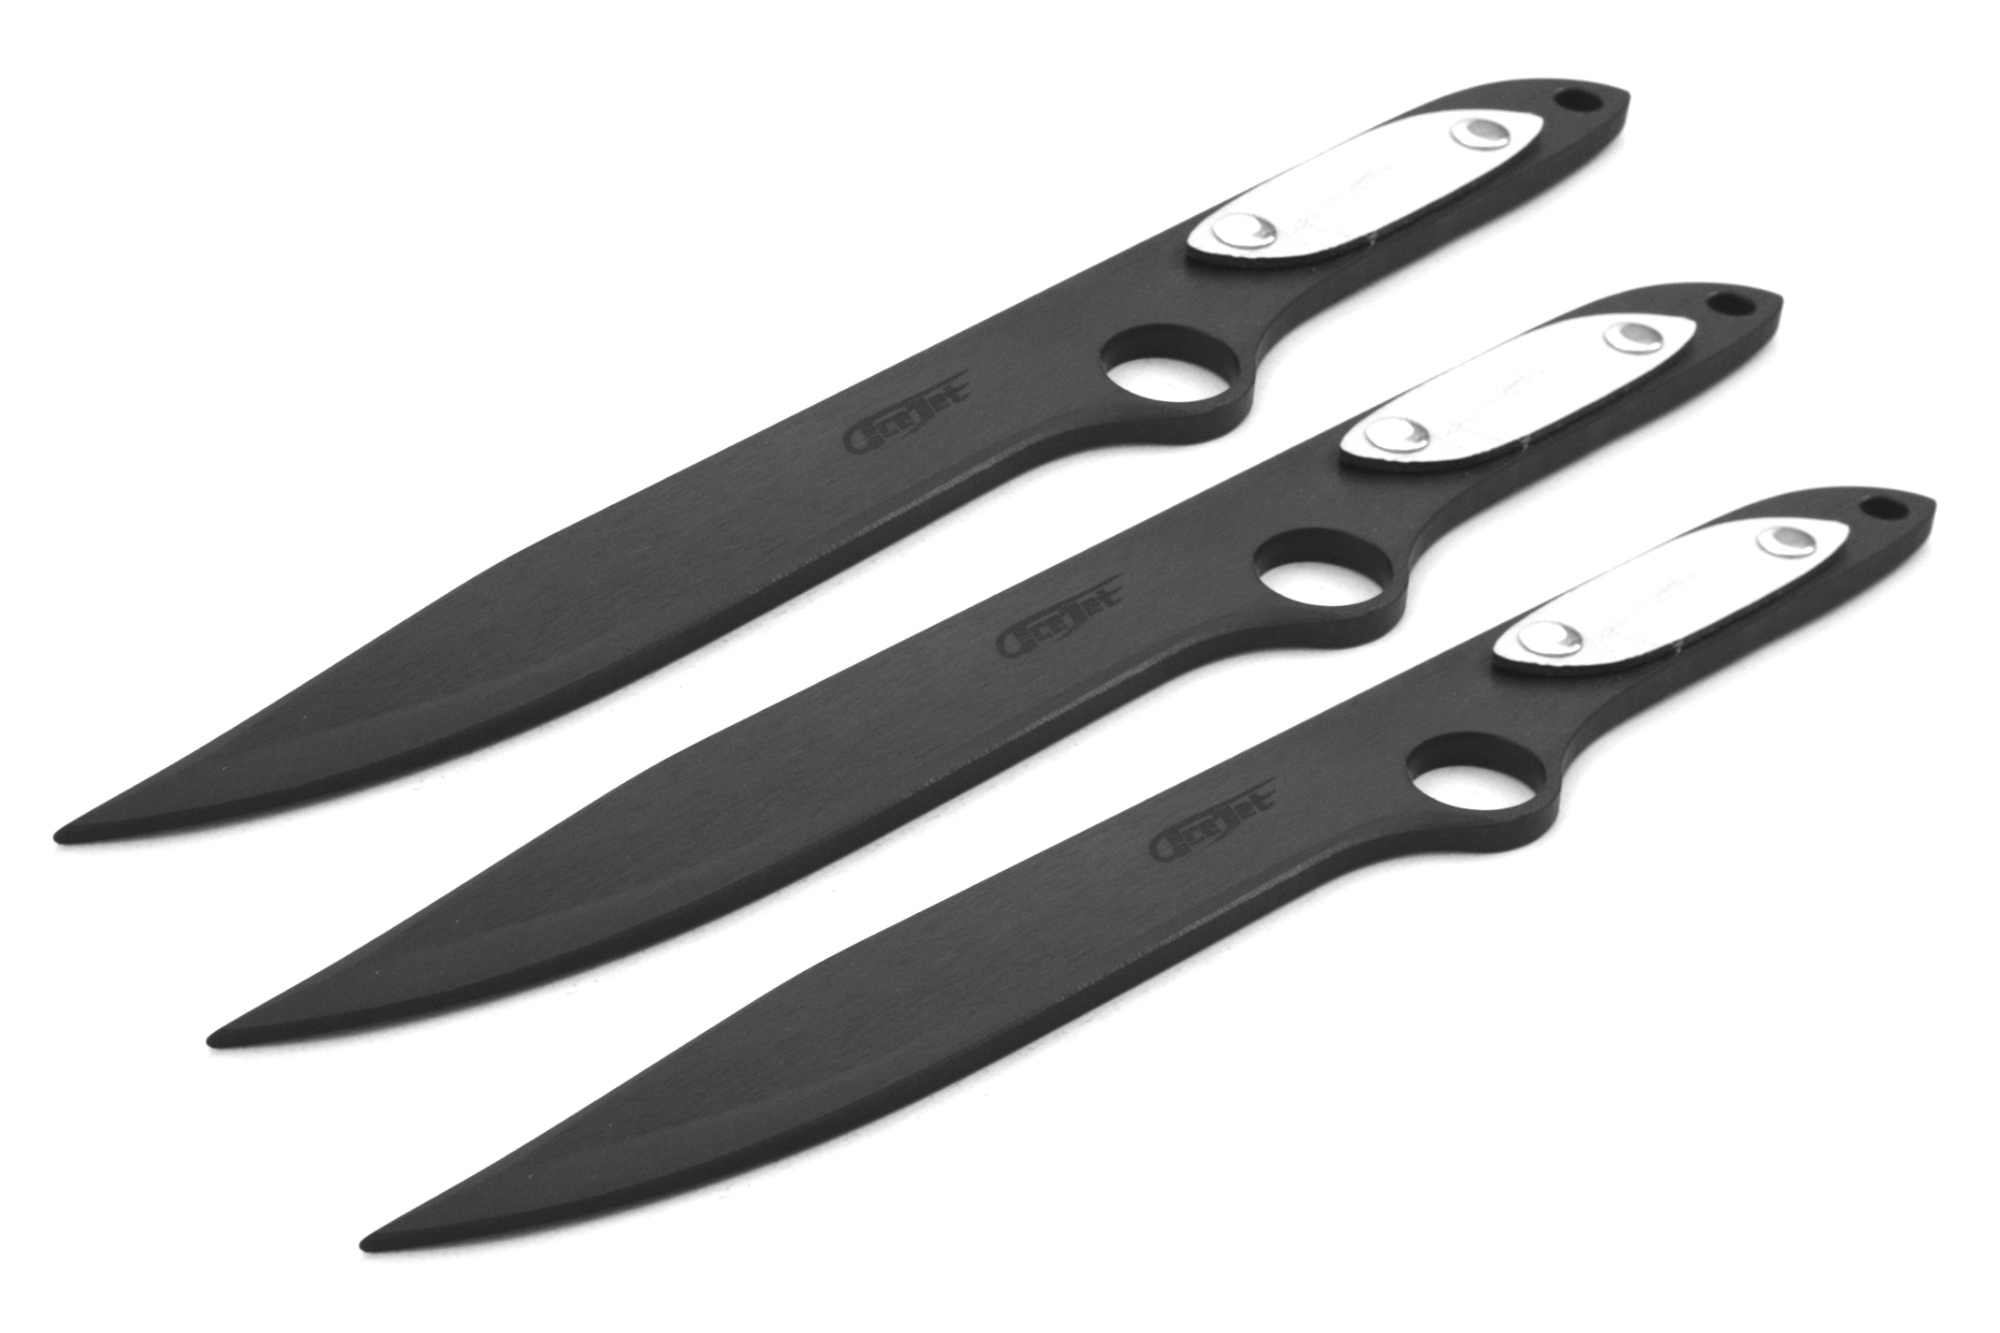 ACEJET SPINNER BOWIE Shadow Hunter 12'' white grip - throwing knife set of 3